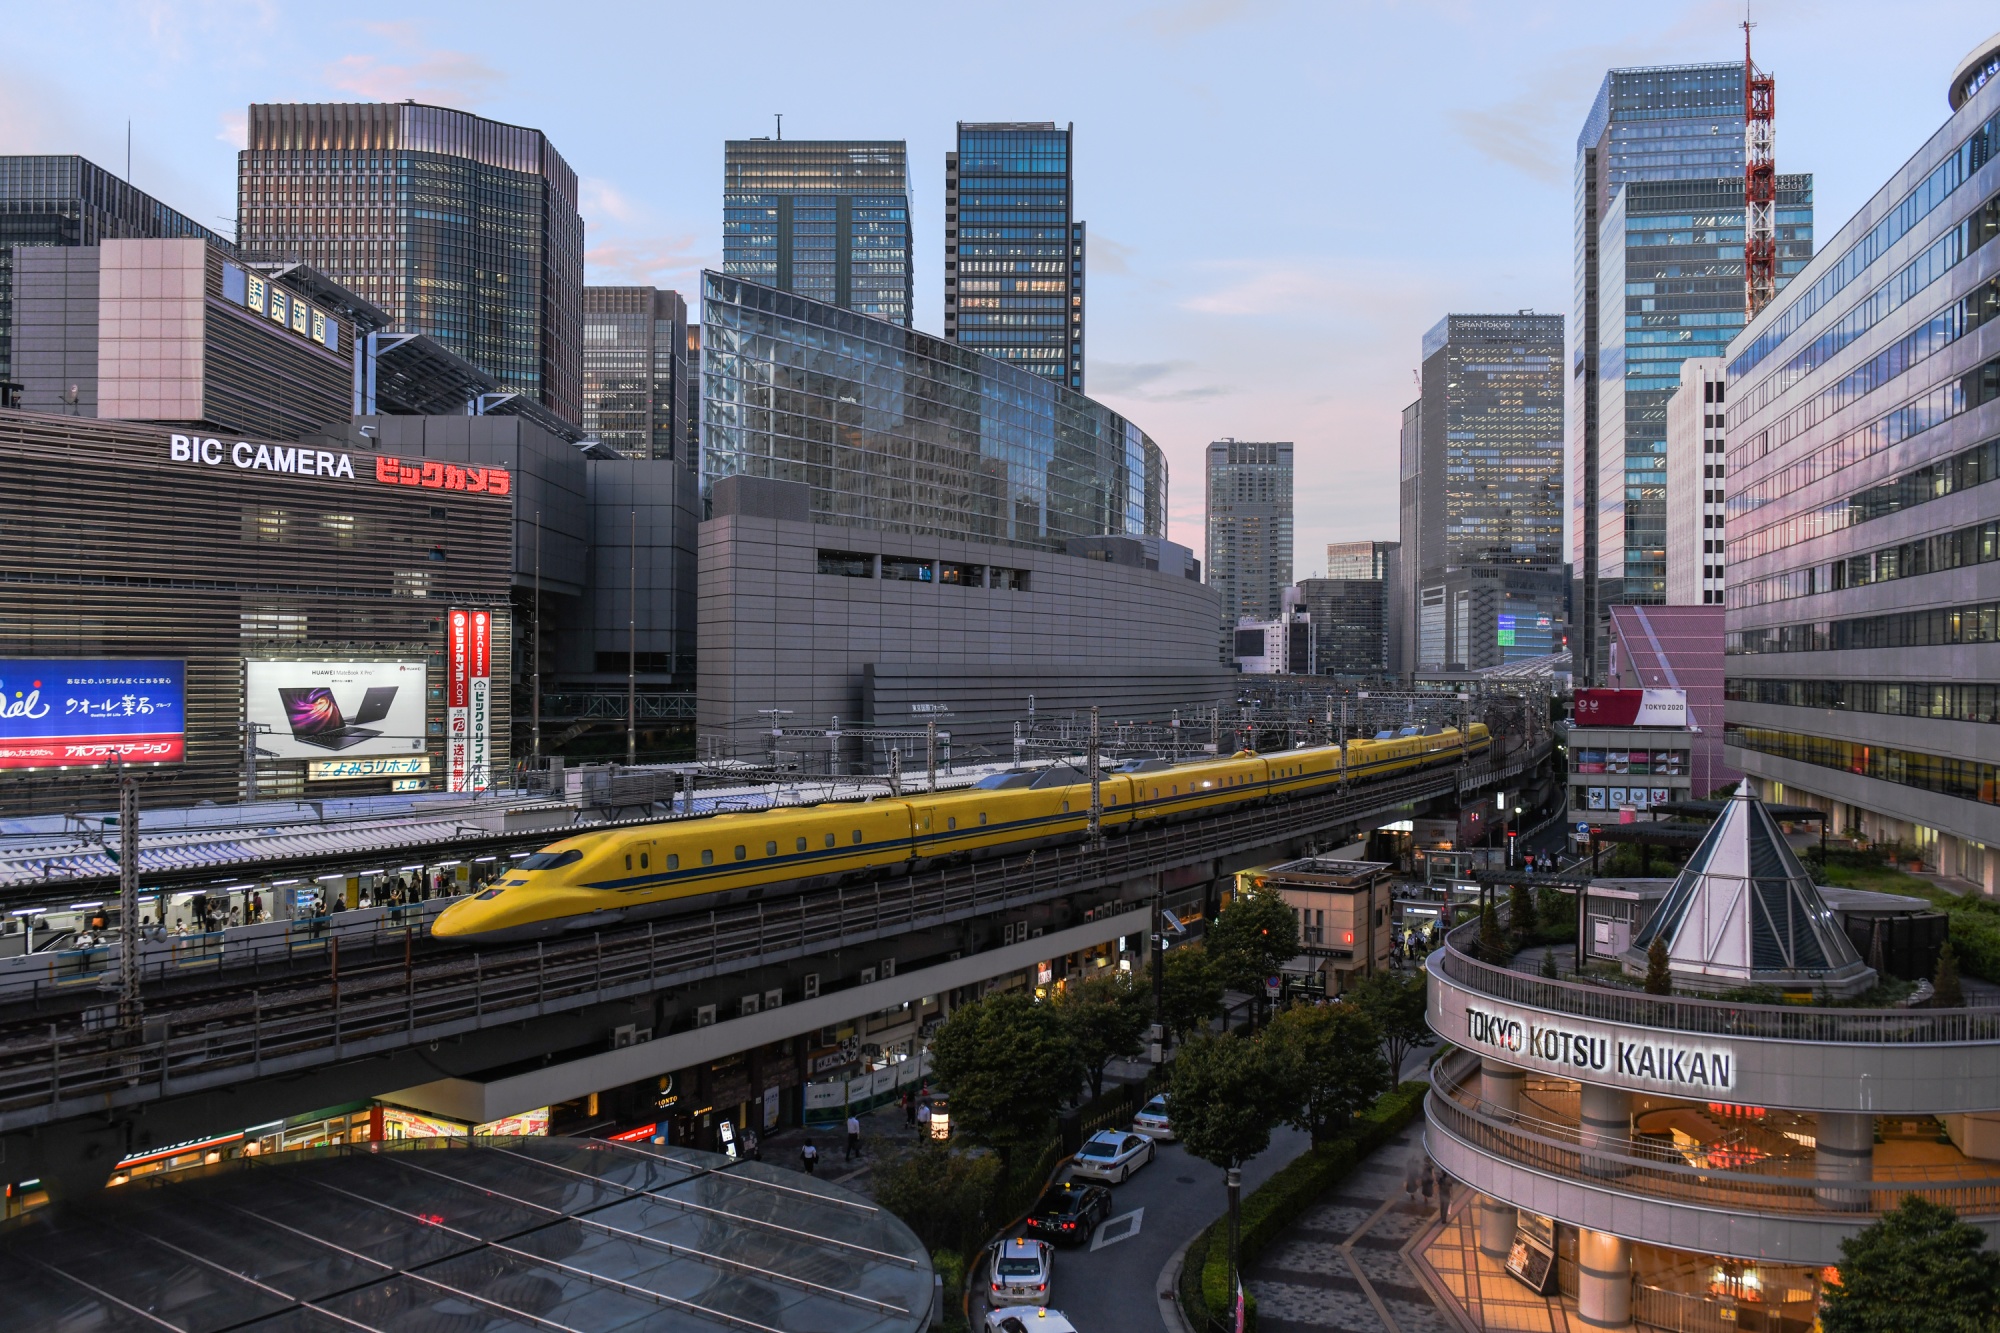 A bullet train pulls into Yurakucho station. Japan’s first elevated rail was completed nearby in 1910, and the first restaurant owner set up shop below the rail a decade later.